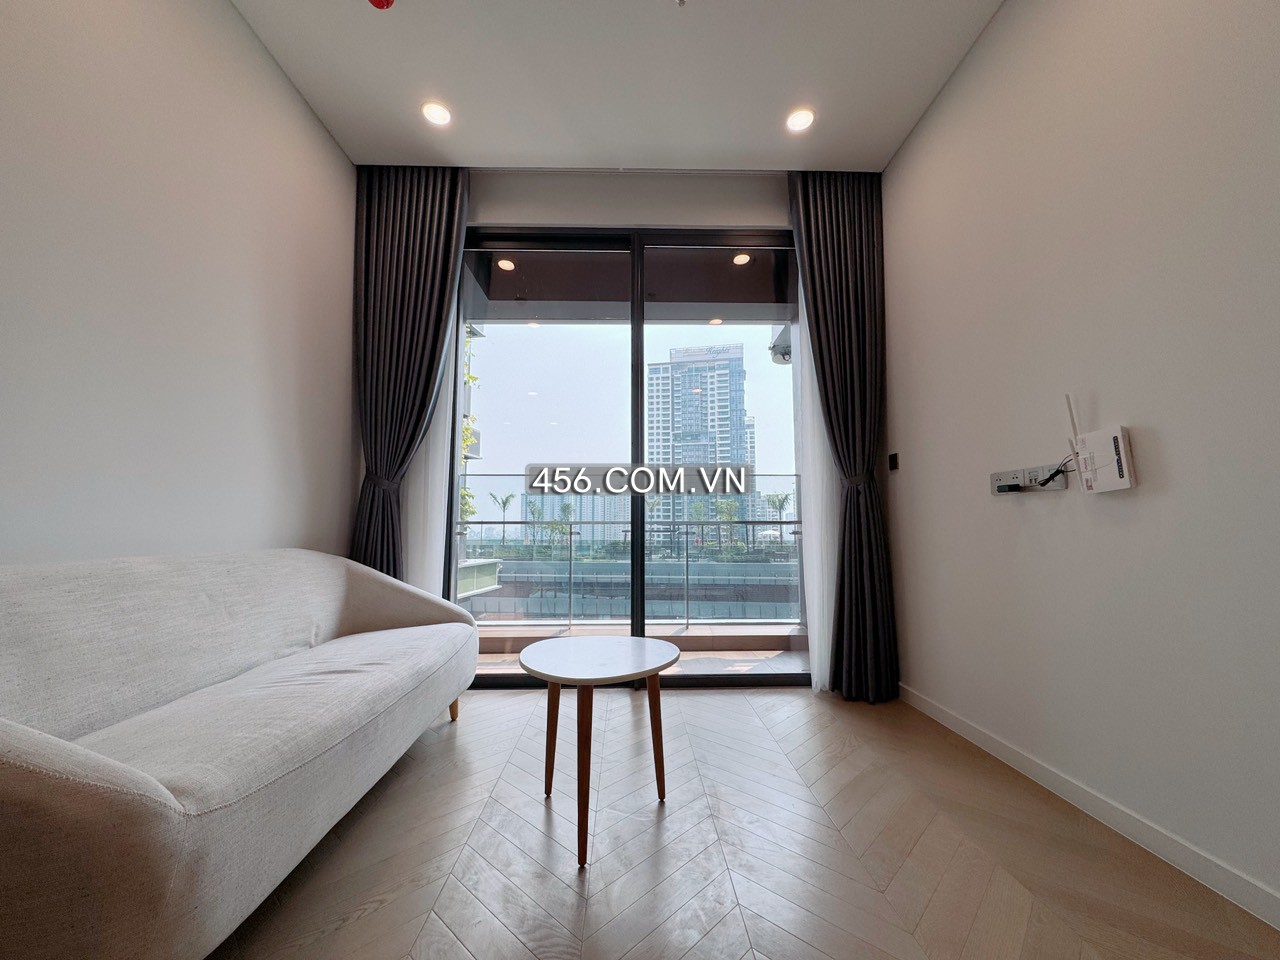 Lumiere RiverSide Thao Dien Apartment For...